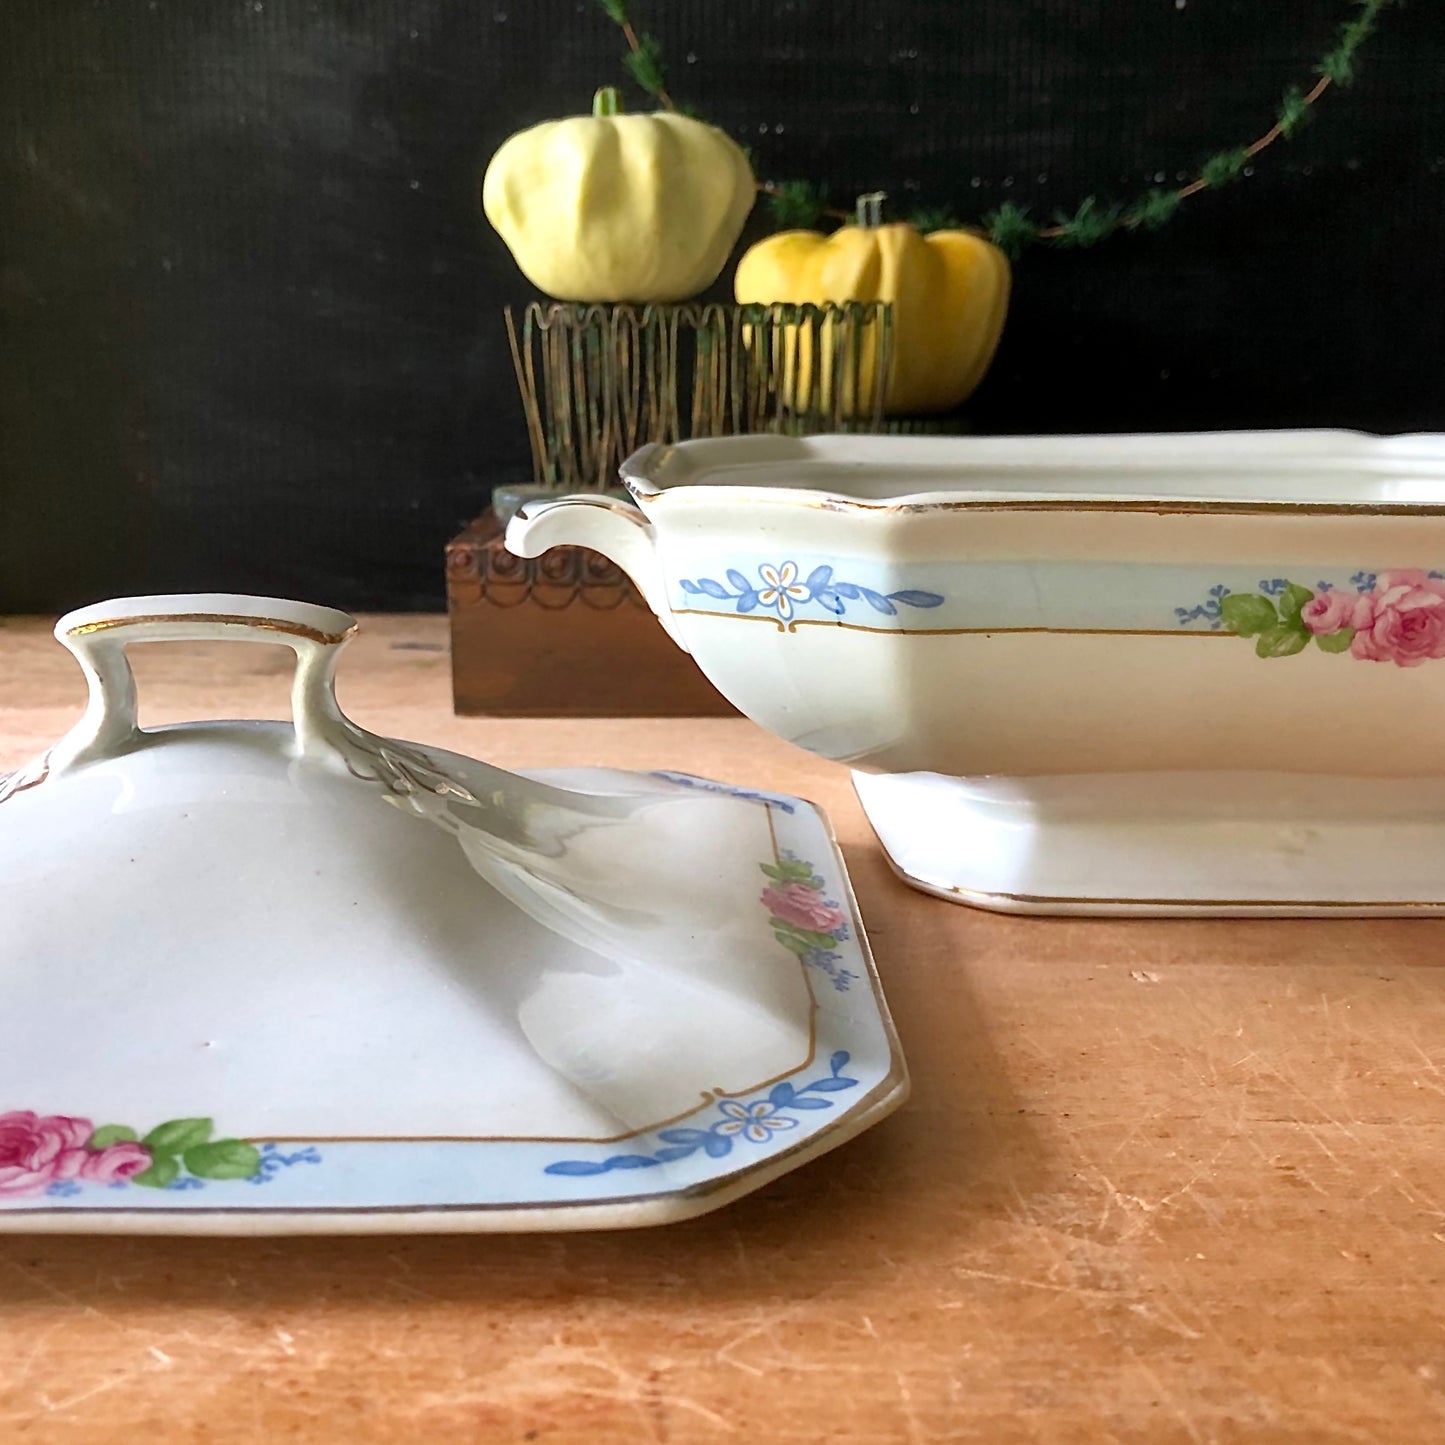 Antique Meakin Covered Vegetable Dish (c.1900s)